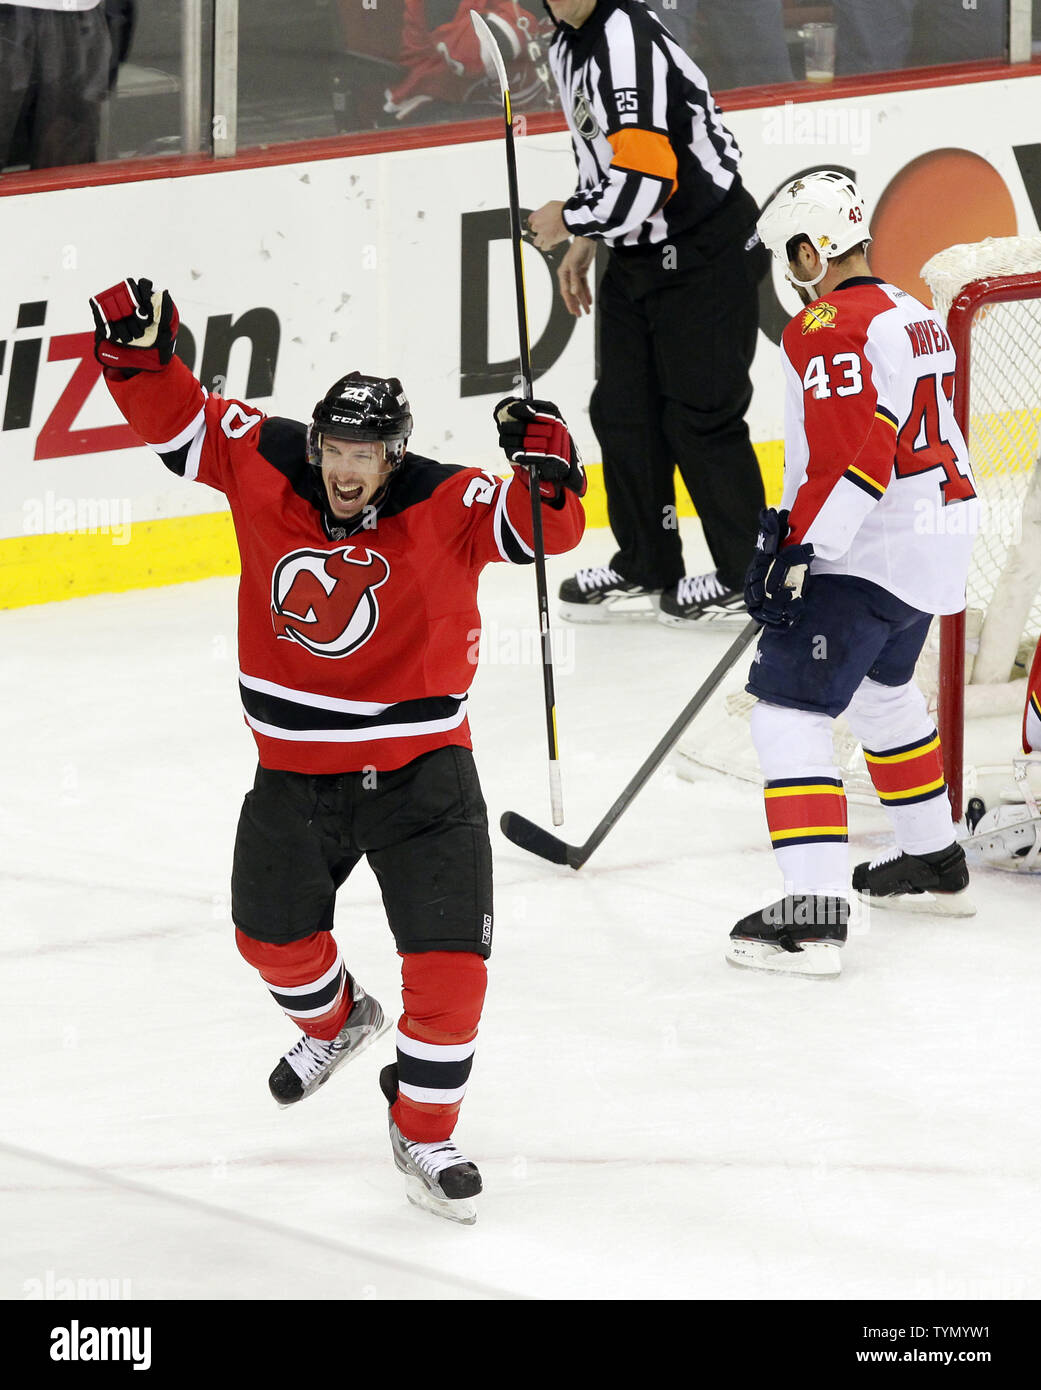 NHL Playoffs 2012, Florida Panthers Vs. New Jersey Devils: Game